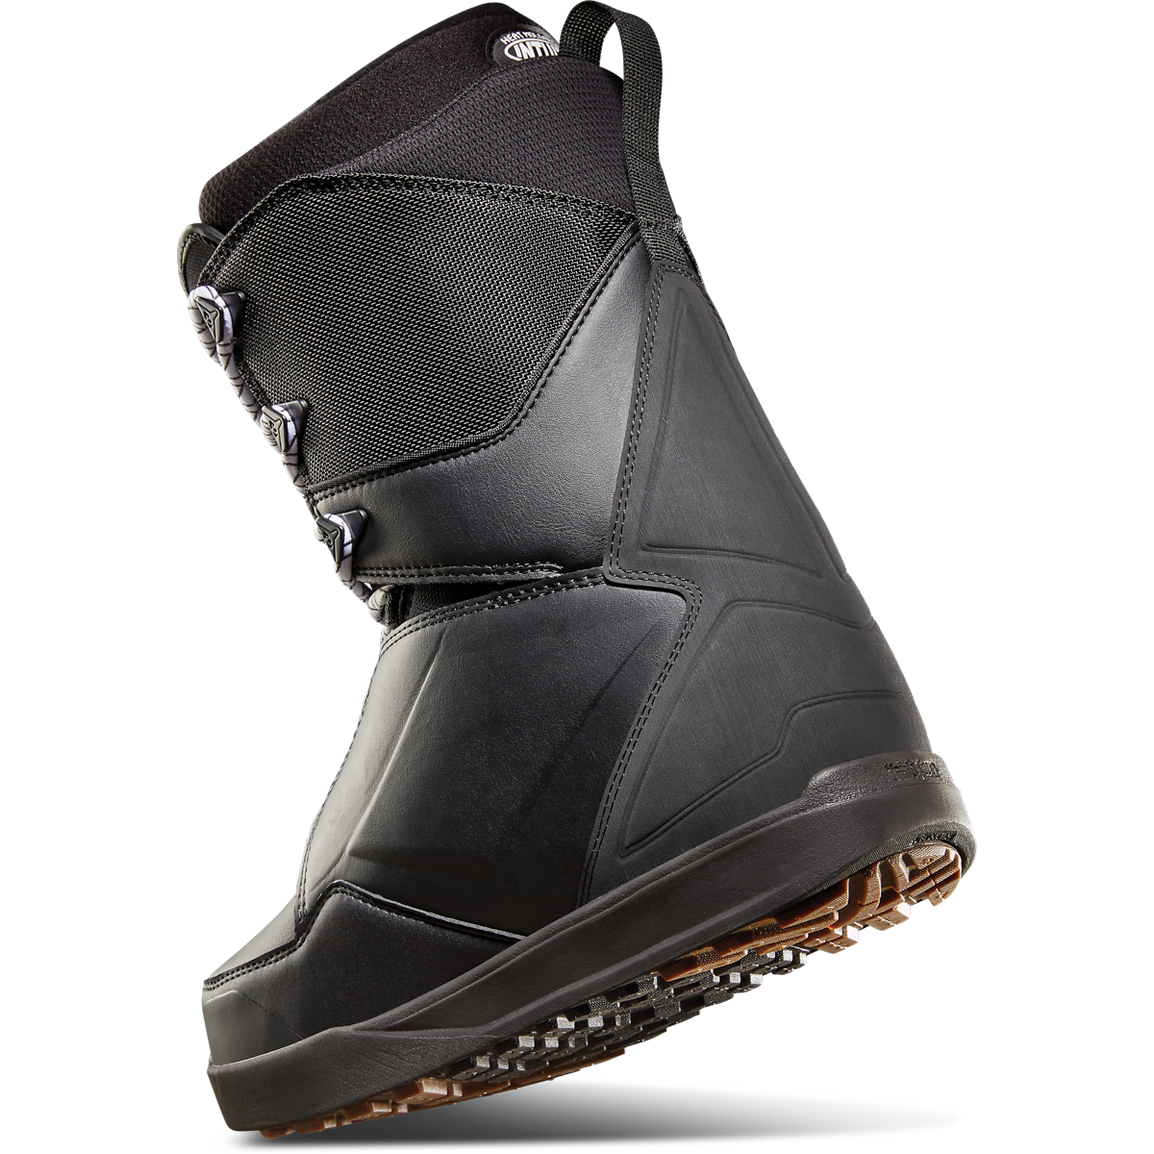 ThirtyTwo 2024 Lashed Snowboard Boot